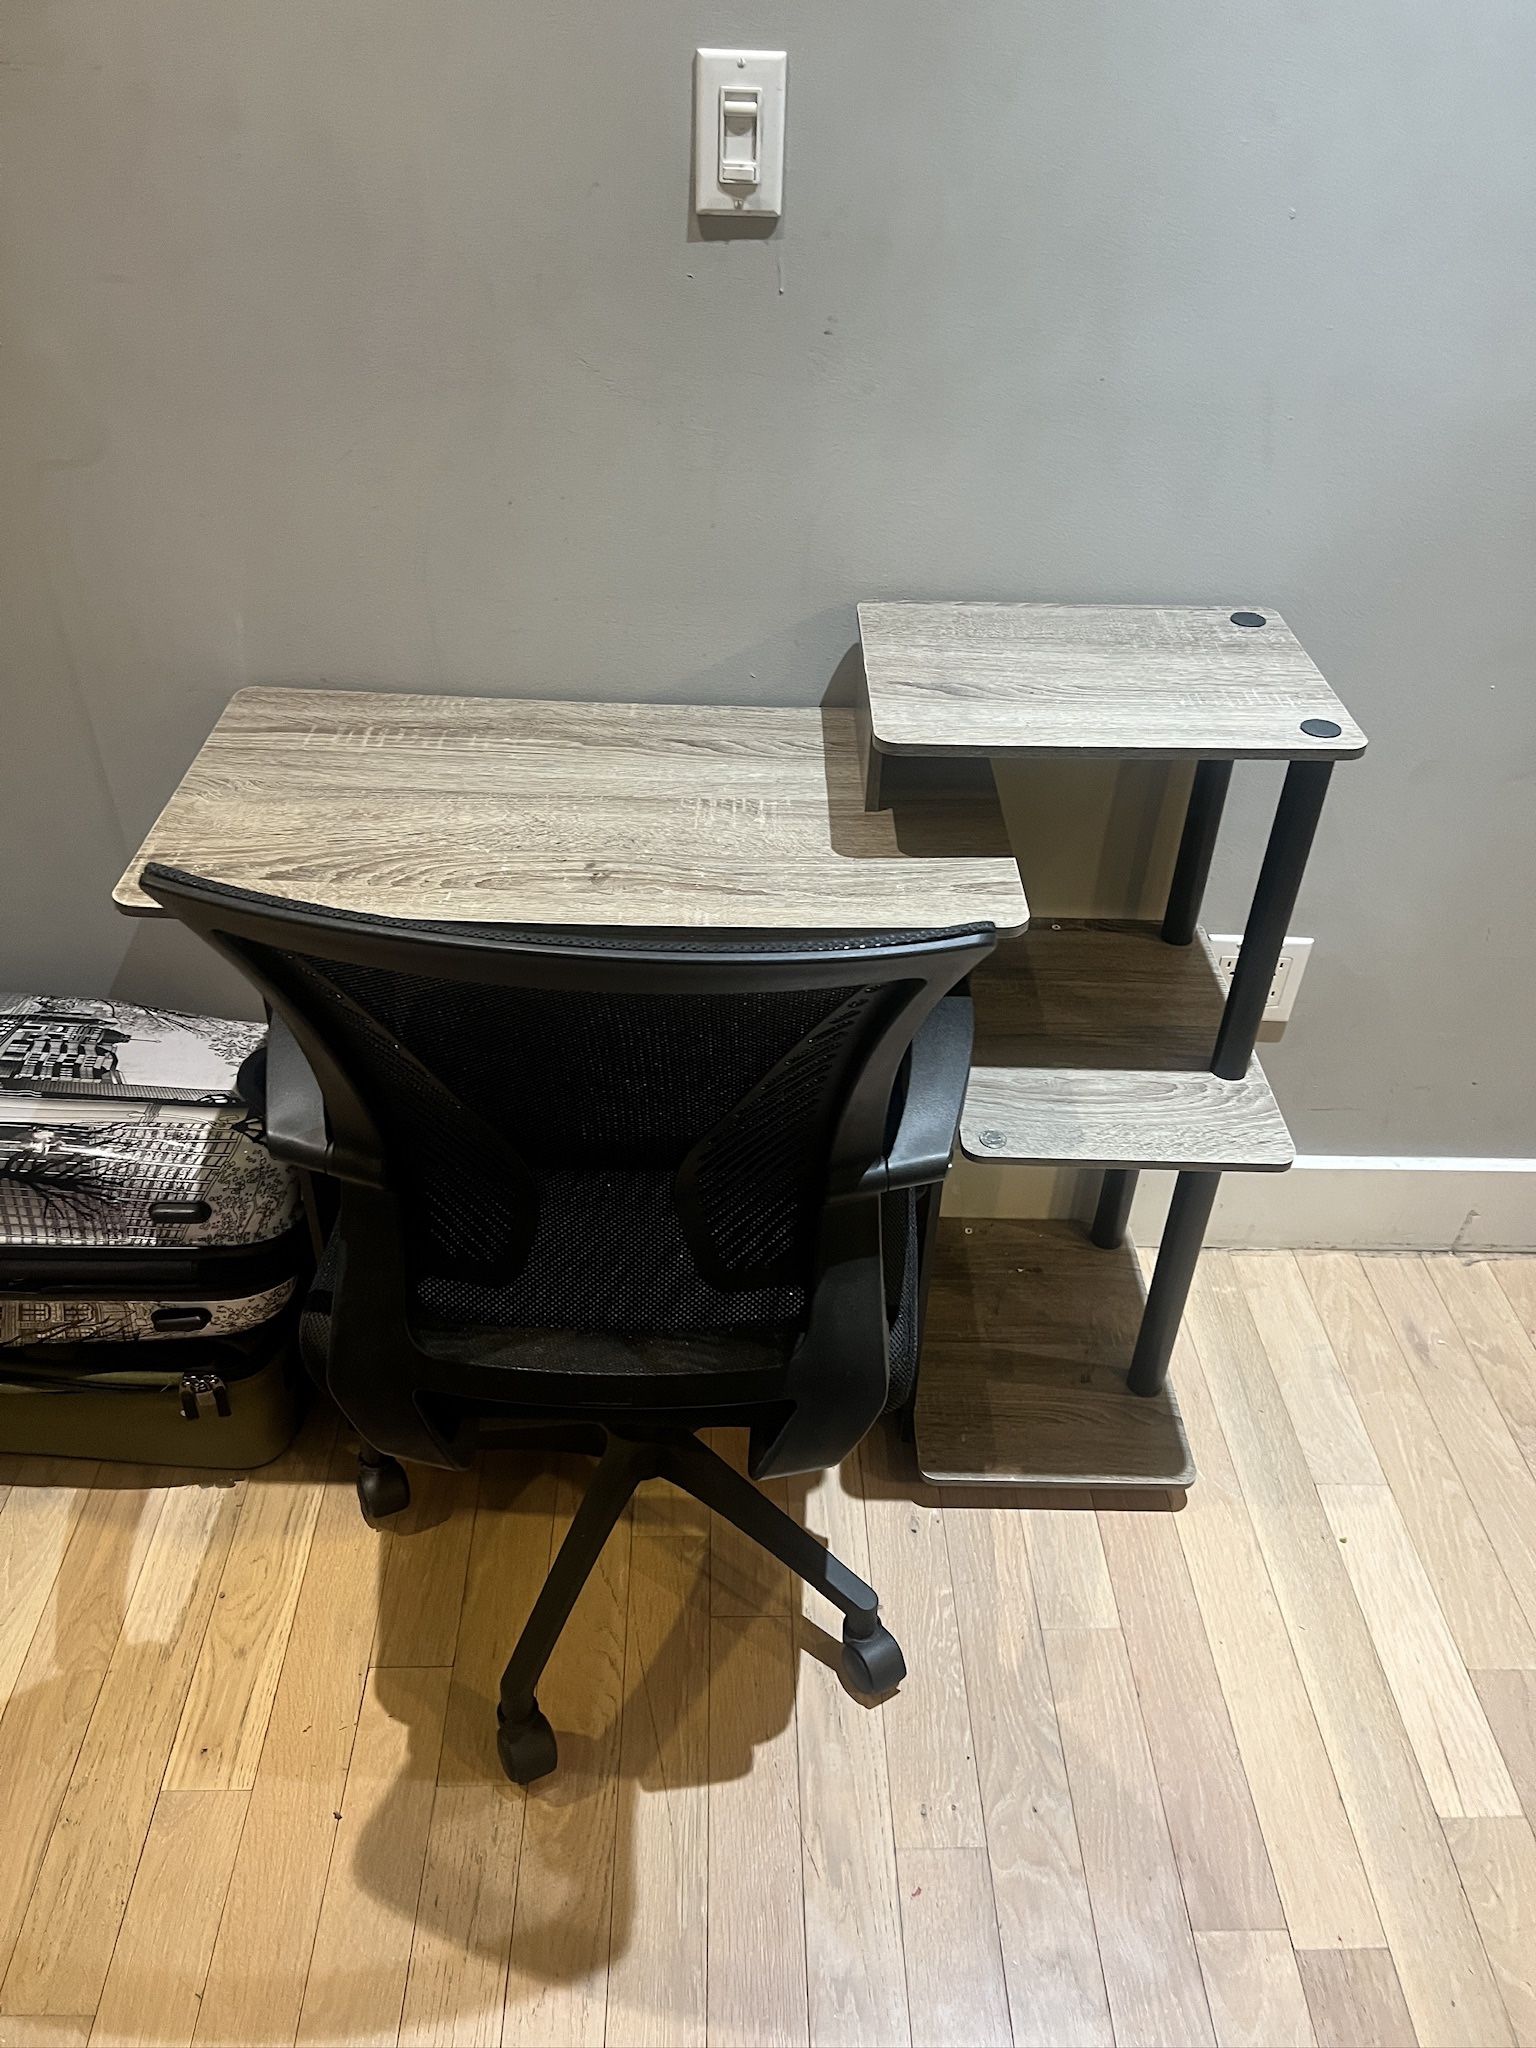 Small Office Desk + Chair